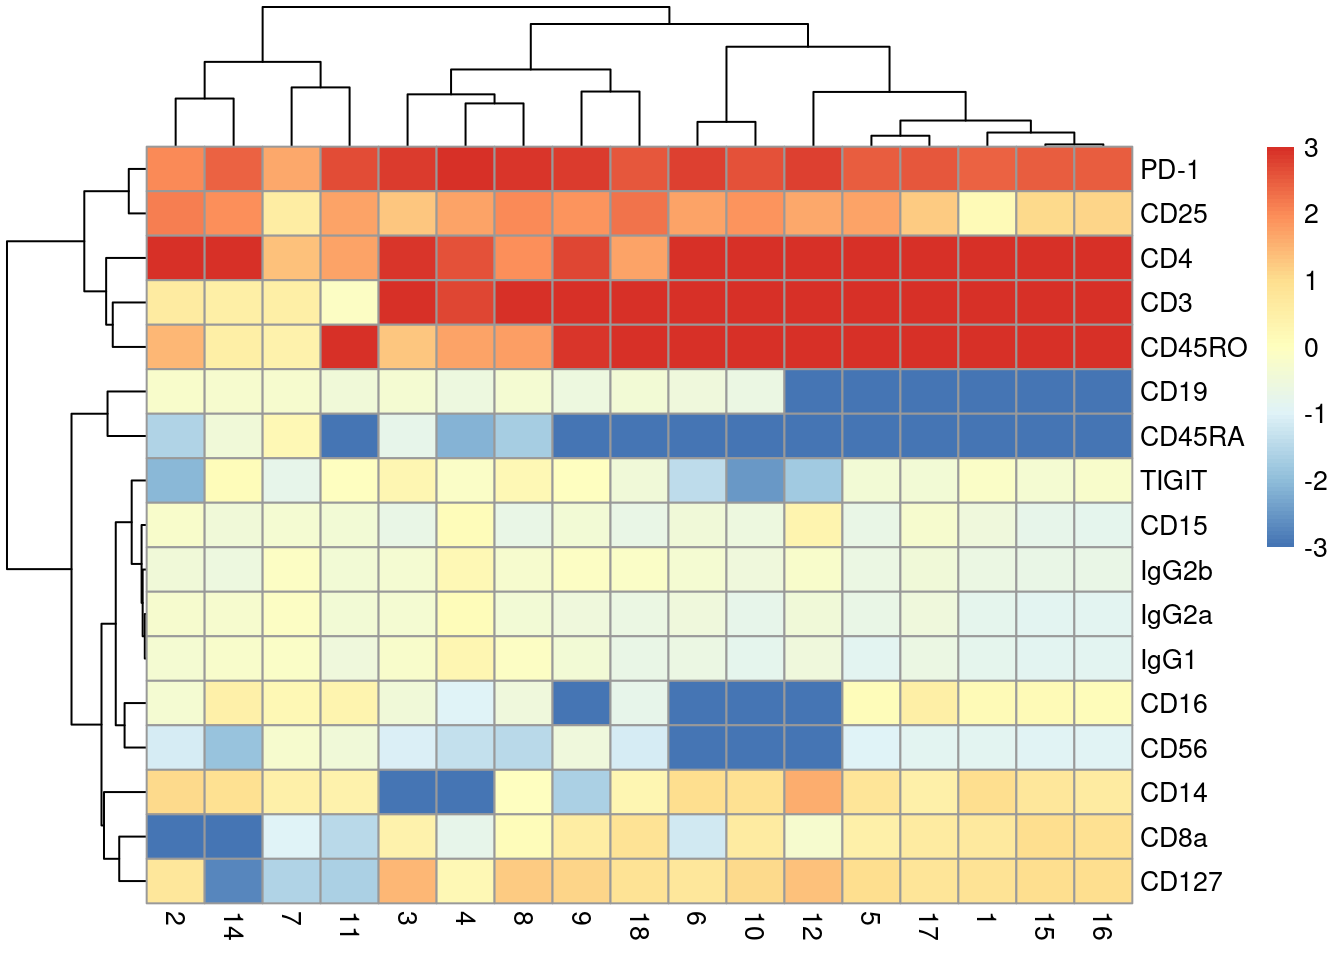 Heatmap of log-fold changes in tag abundances in cluster 13 compared to all other clusters identified from transcript data in the PBMC data set.